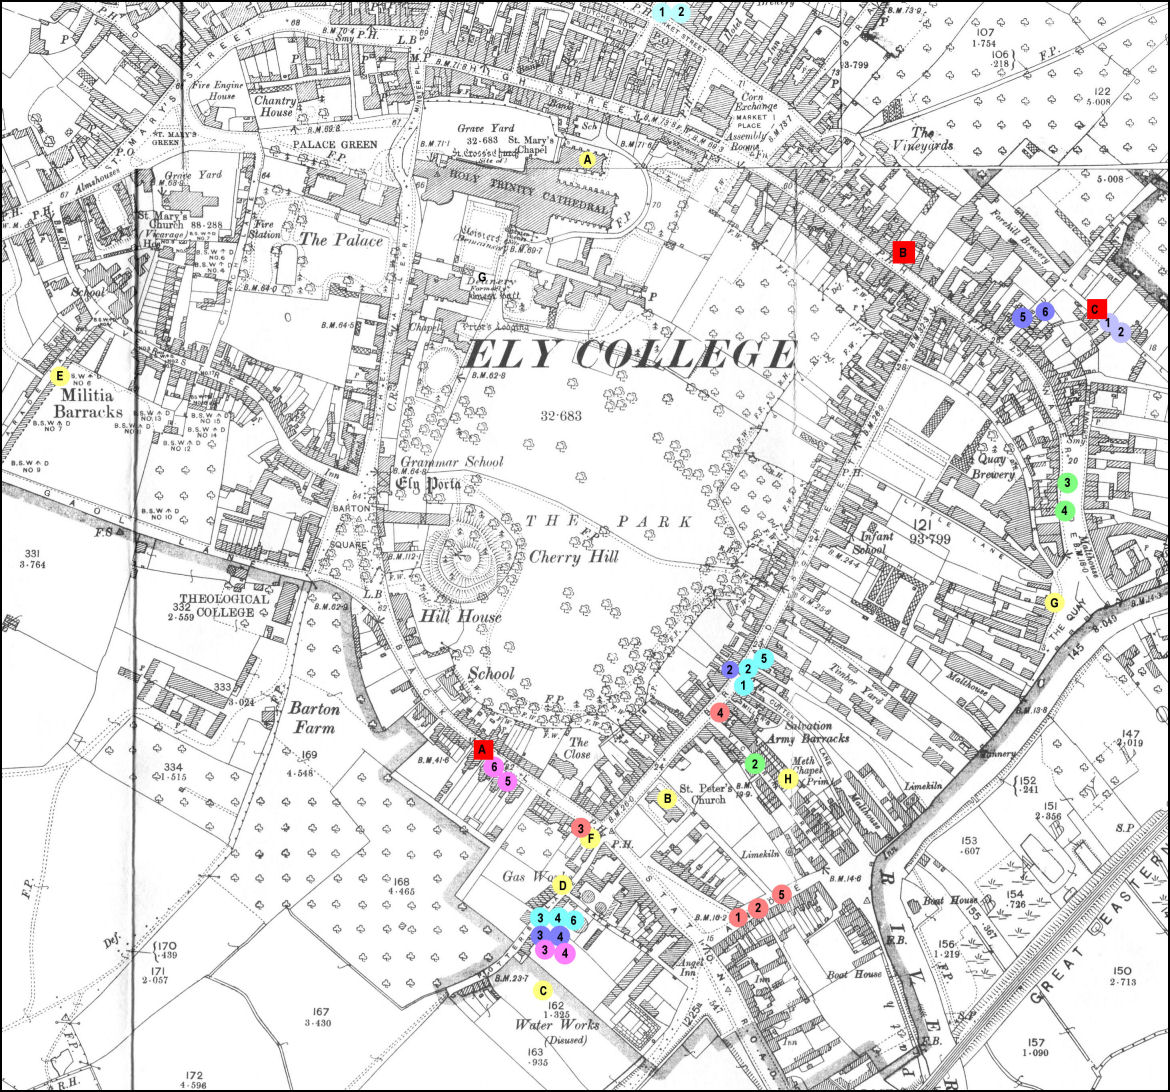 A MAP OF THE WATERSIDE AREA OF ELY depicting places of significance to the PAGE and CROSS families in the late 19th and early 20th Centuries.